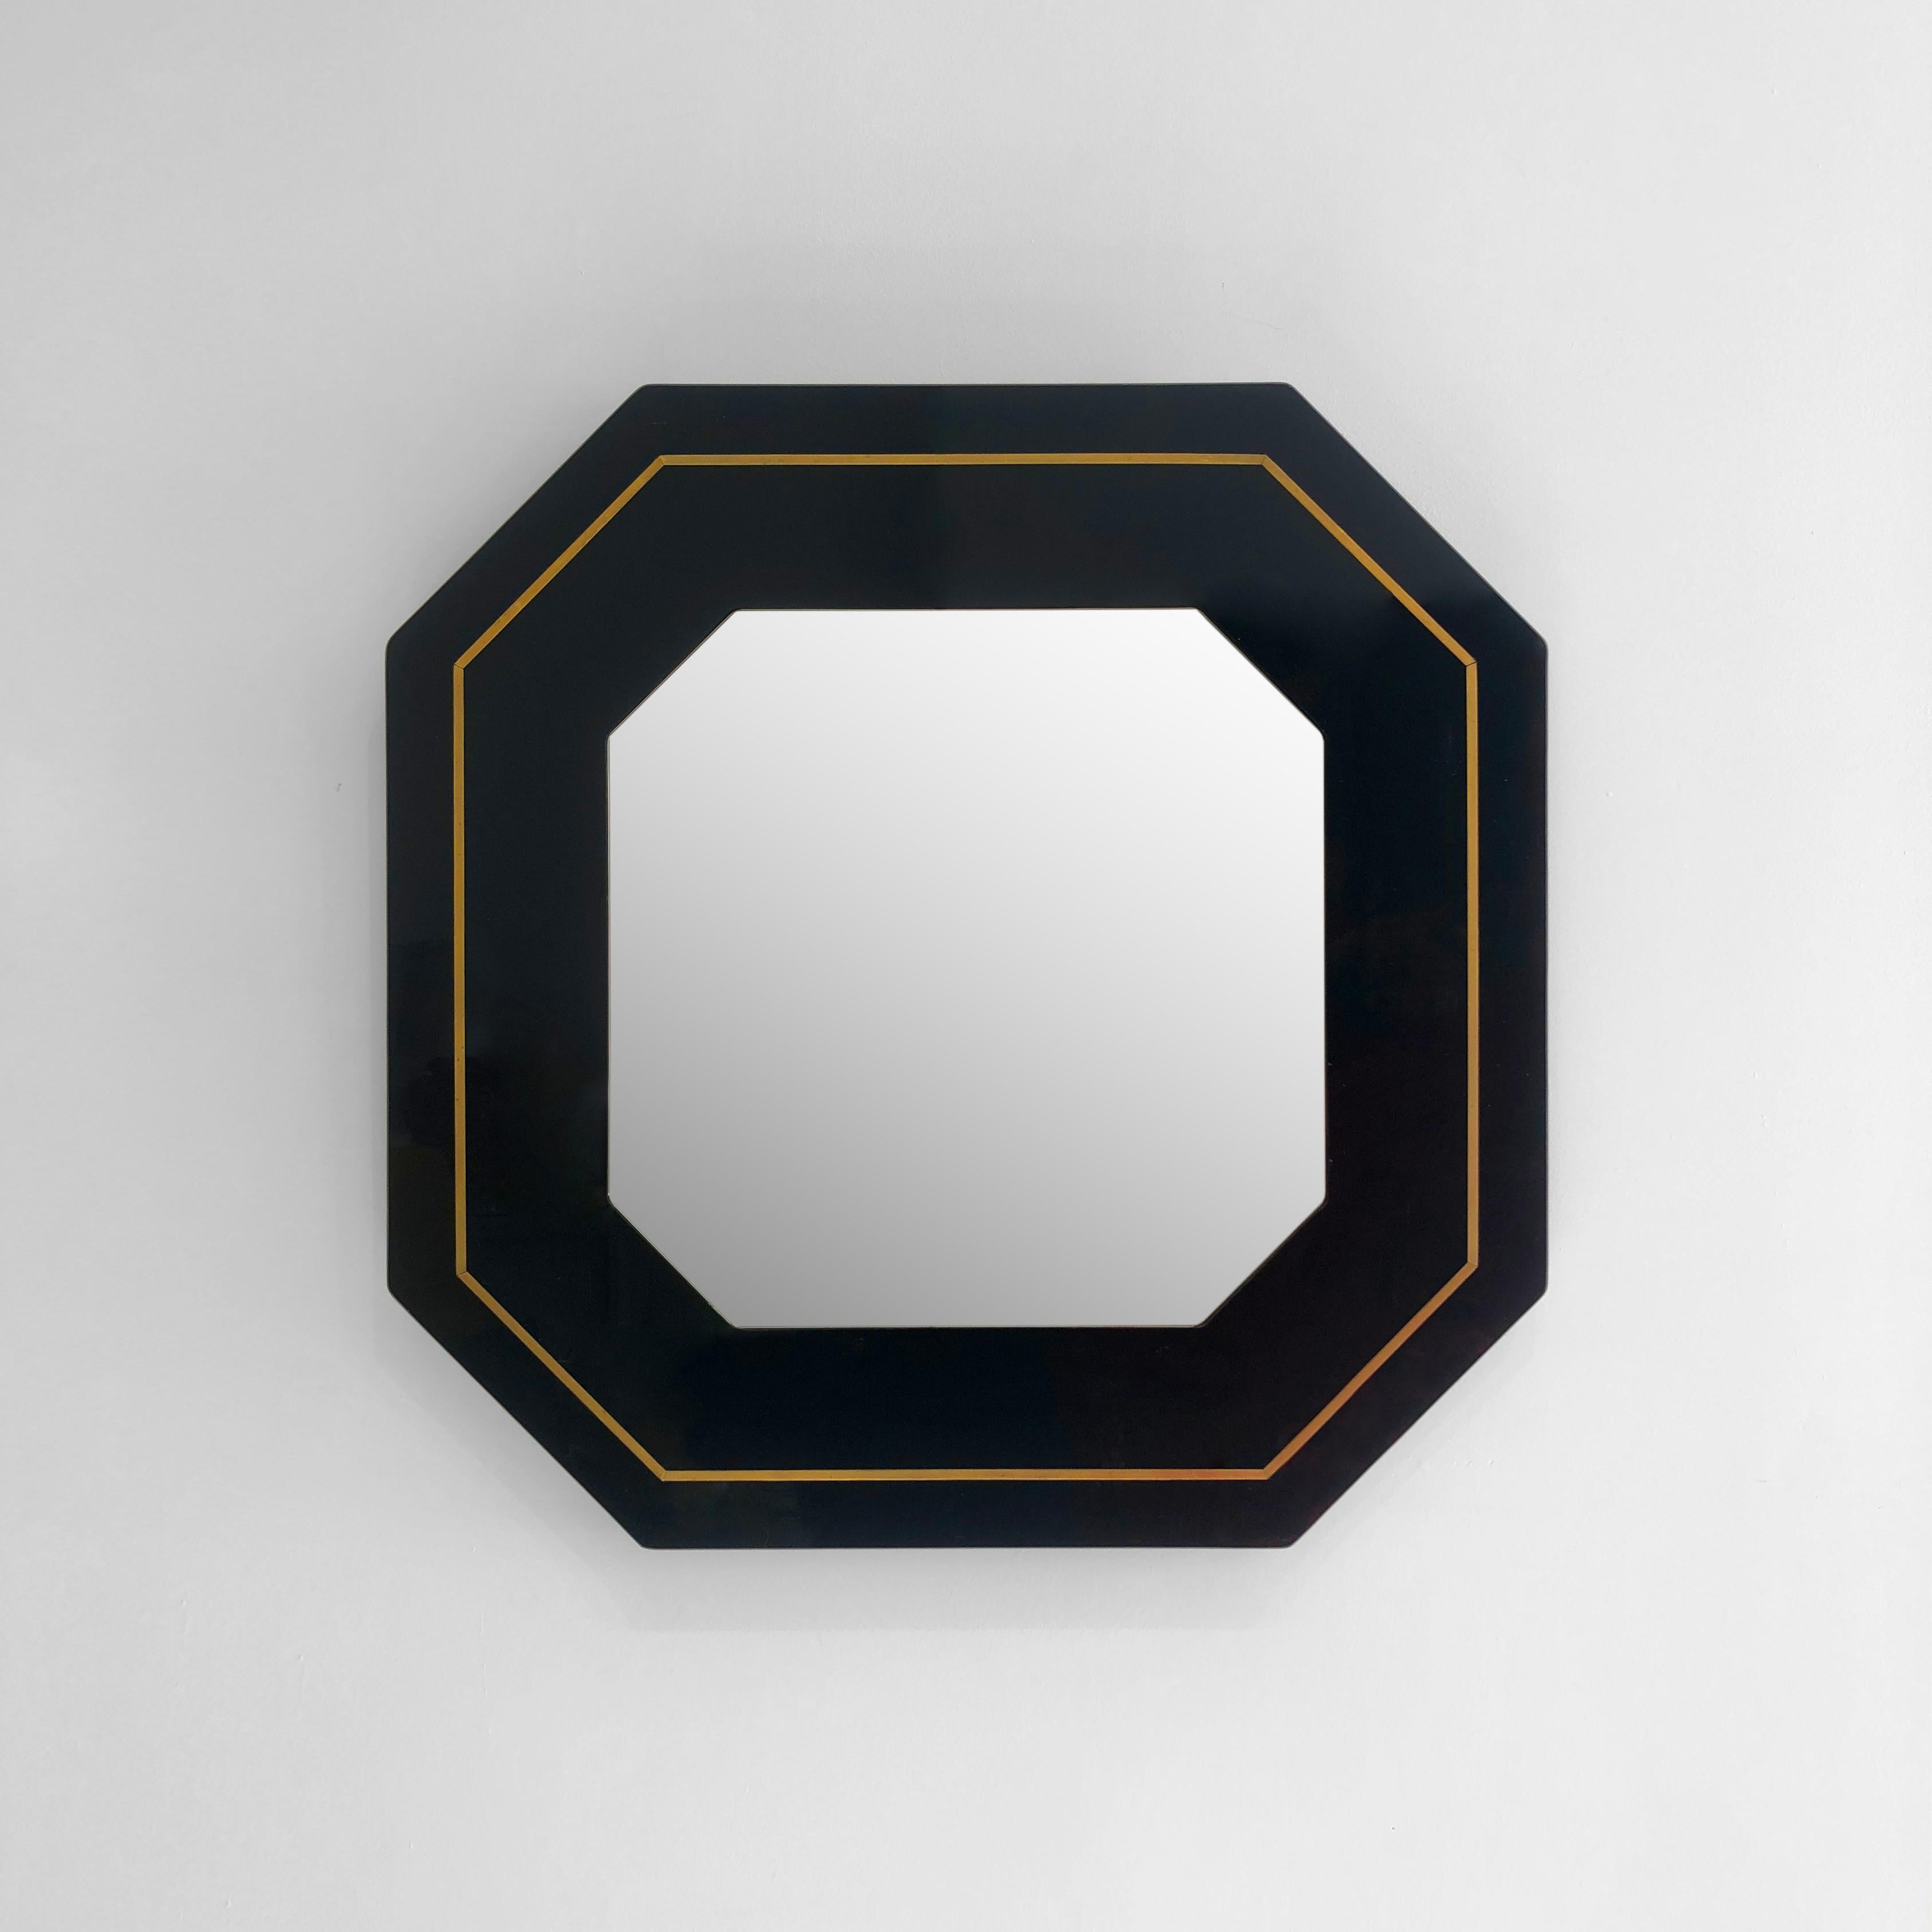 The octagonal wall mirror designed by Eric Maville in the 1970s that beautifully combines modern materials and design aesthetics of that era but still keeps its contemporary look. The mirror's shape, an octagon, adds a touch of uniqueness and